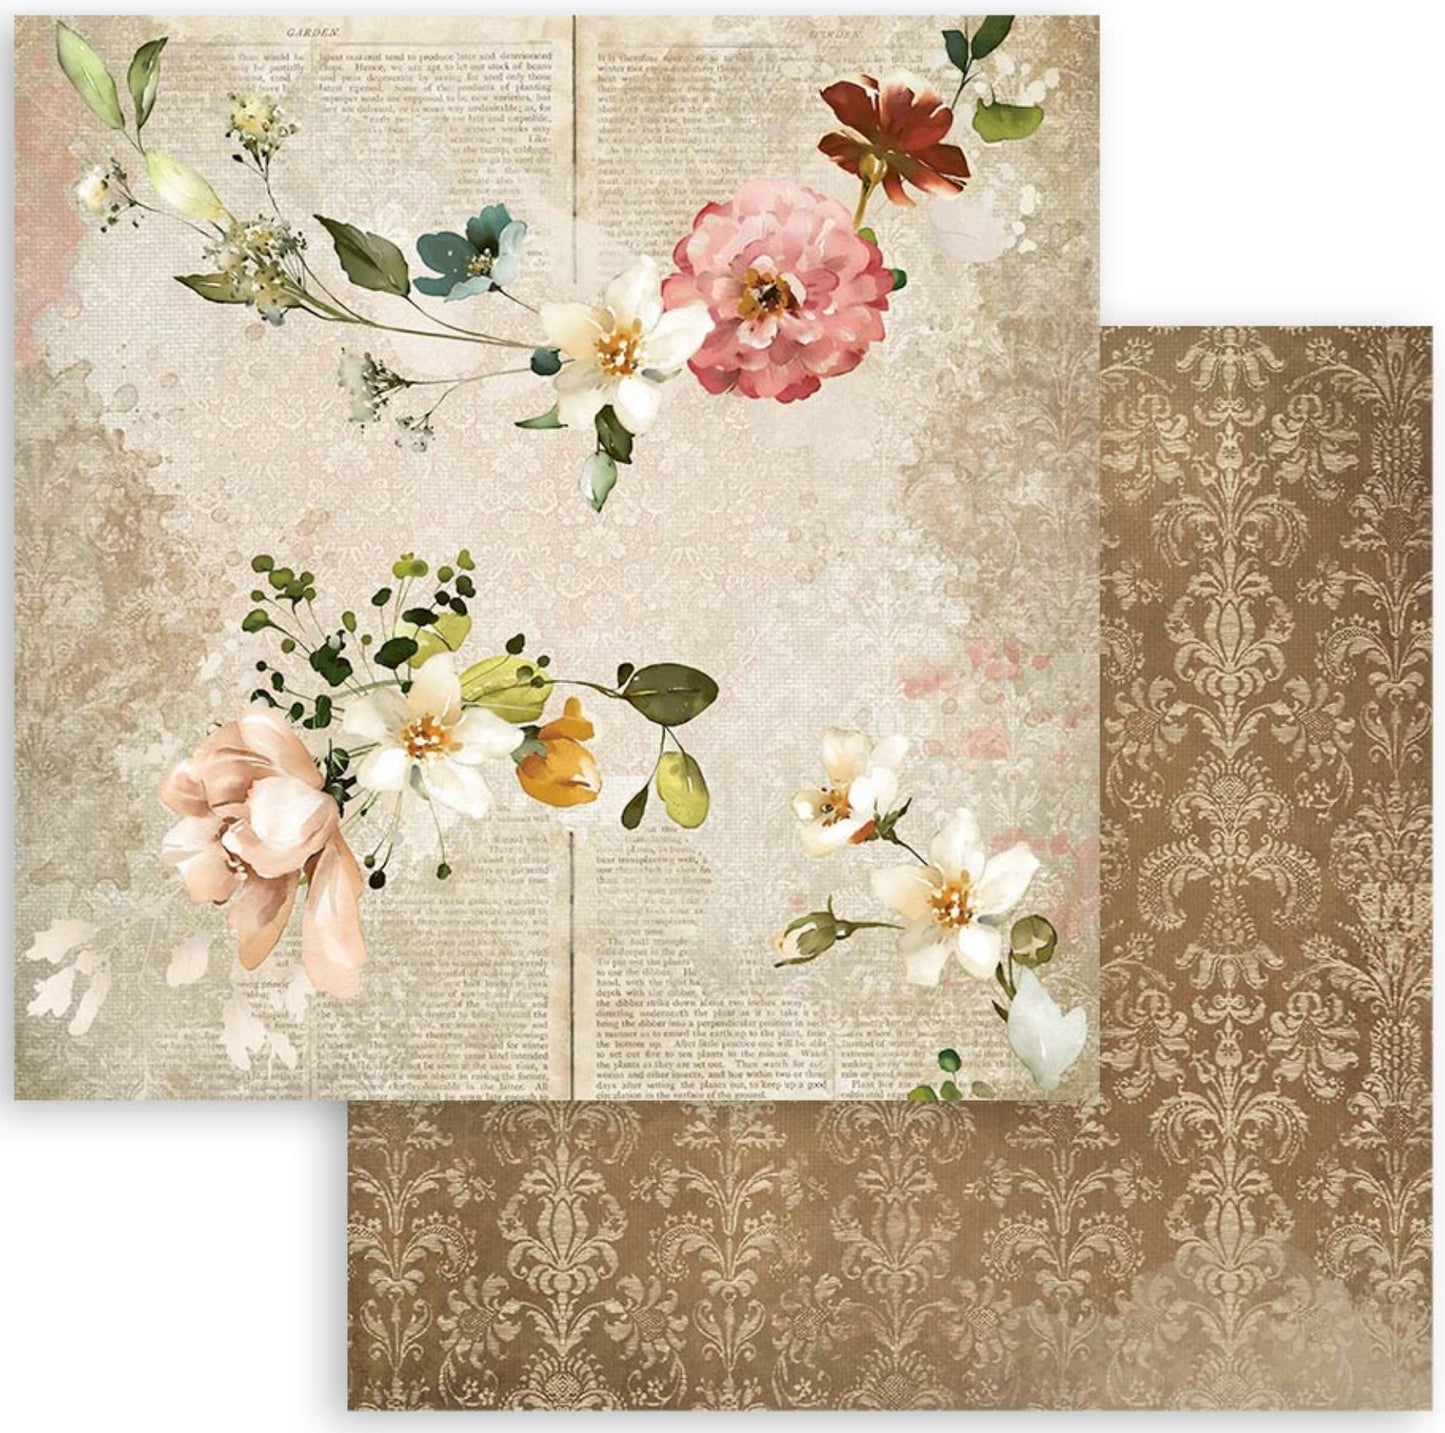 Stamperia - Scrapbooking Small Pad 10 sheets cm 20,3X20,3 (8"X8") - Garden of Promises Stamperia